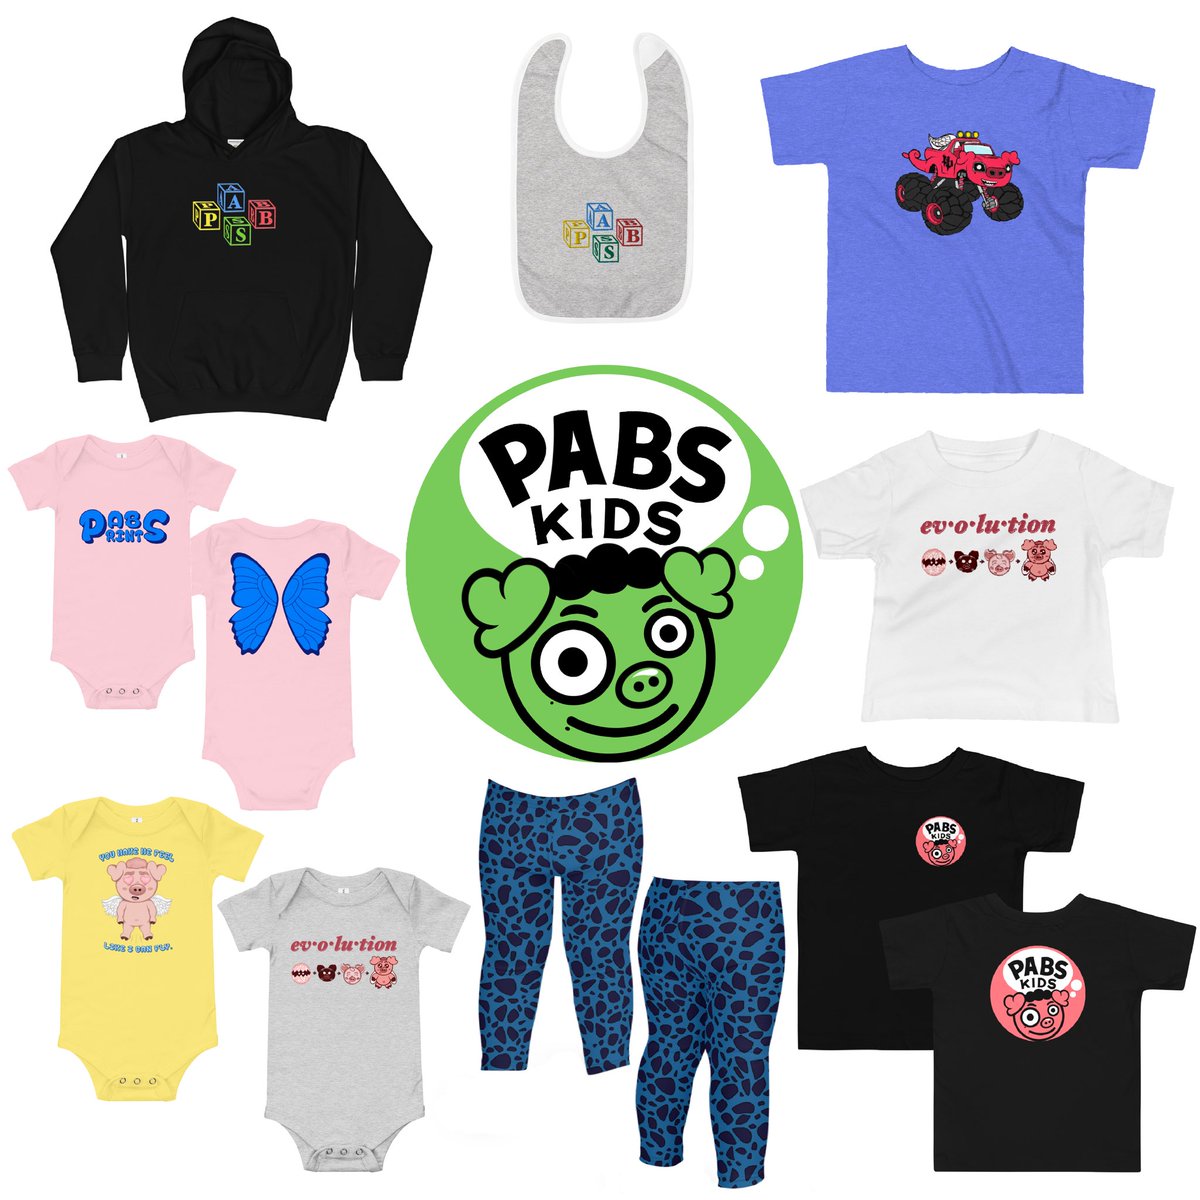 first official “Pabs Kids” collection! 🐷👼🏽 available now online! pabstudio.com/category/pabs-… shop for any little one in your life! #kidsarethefuture 💭